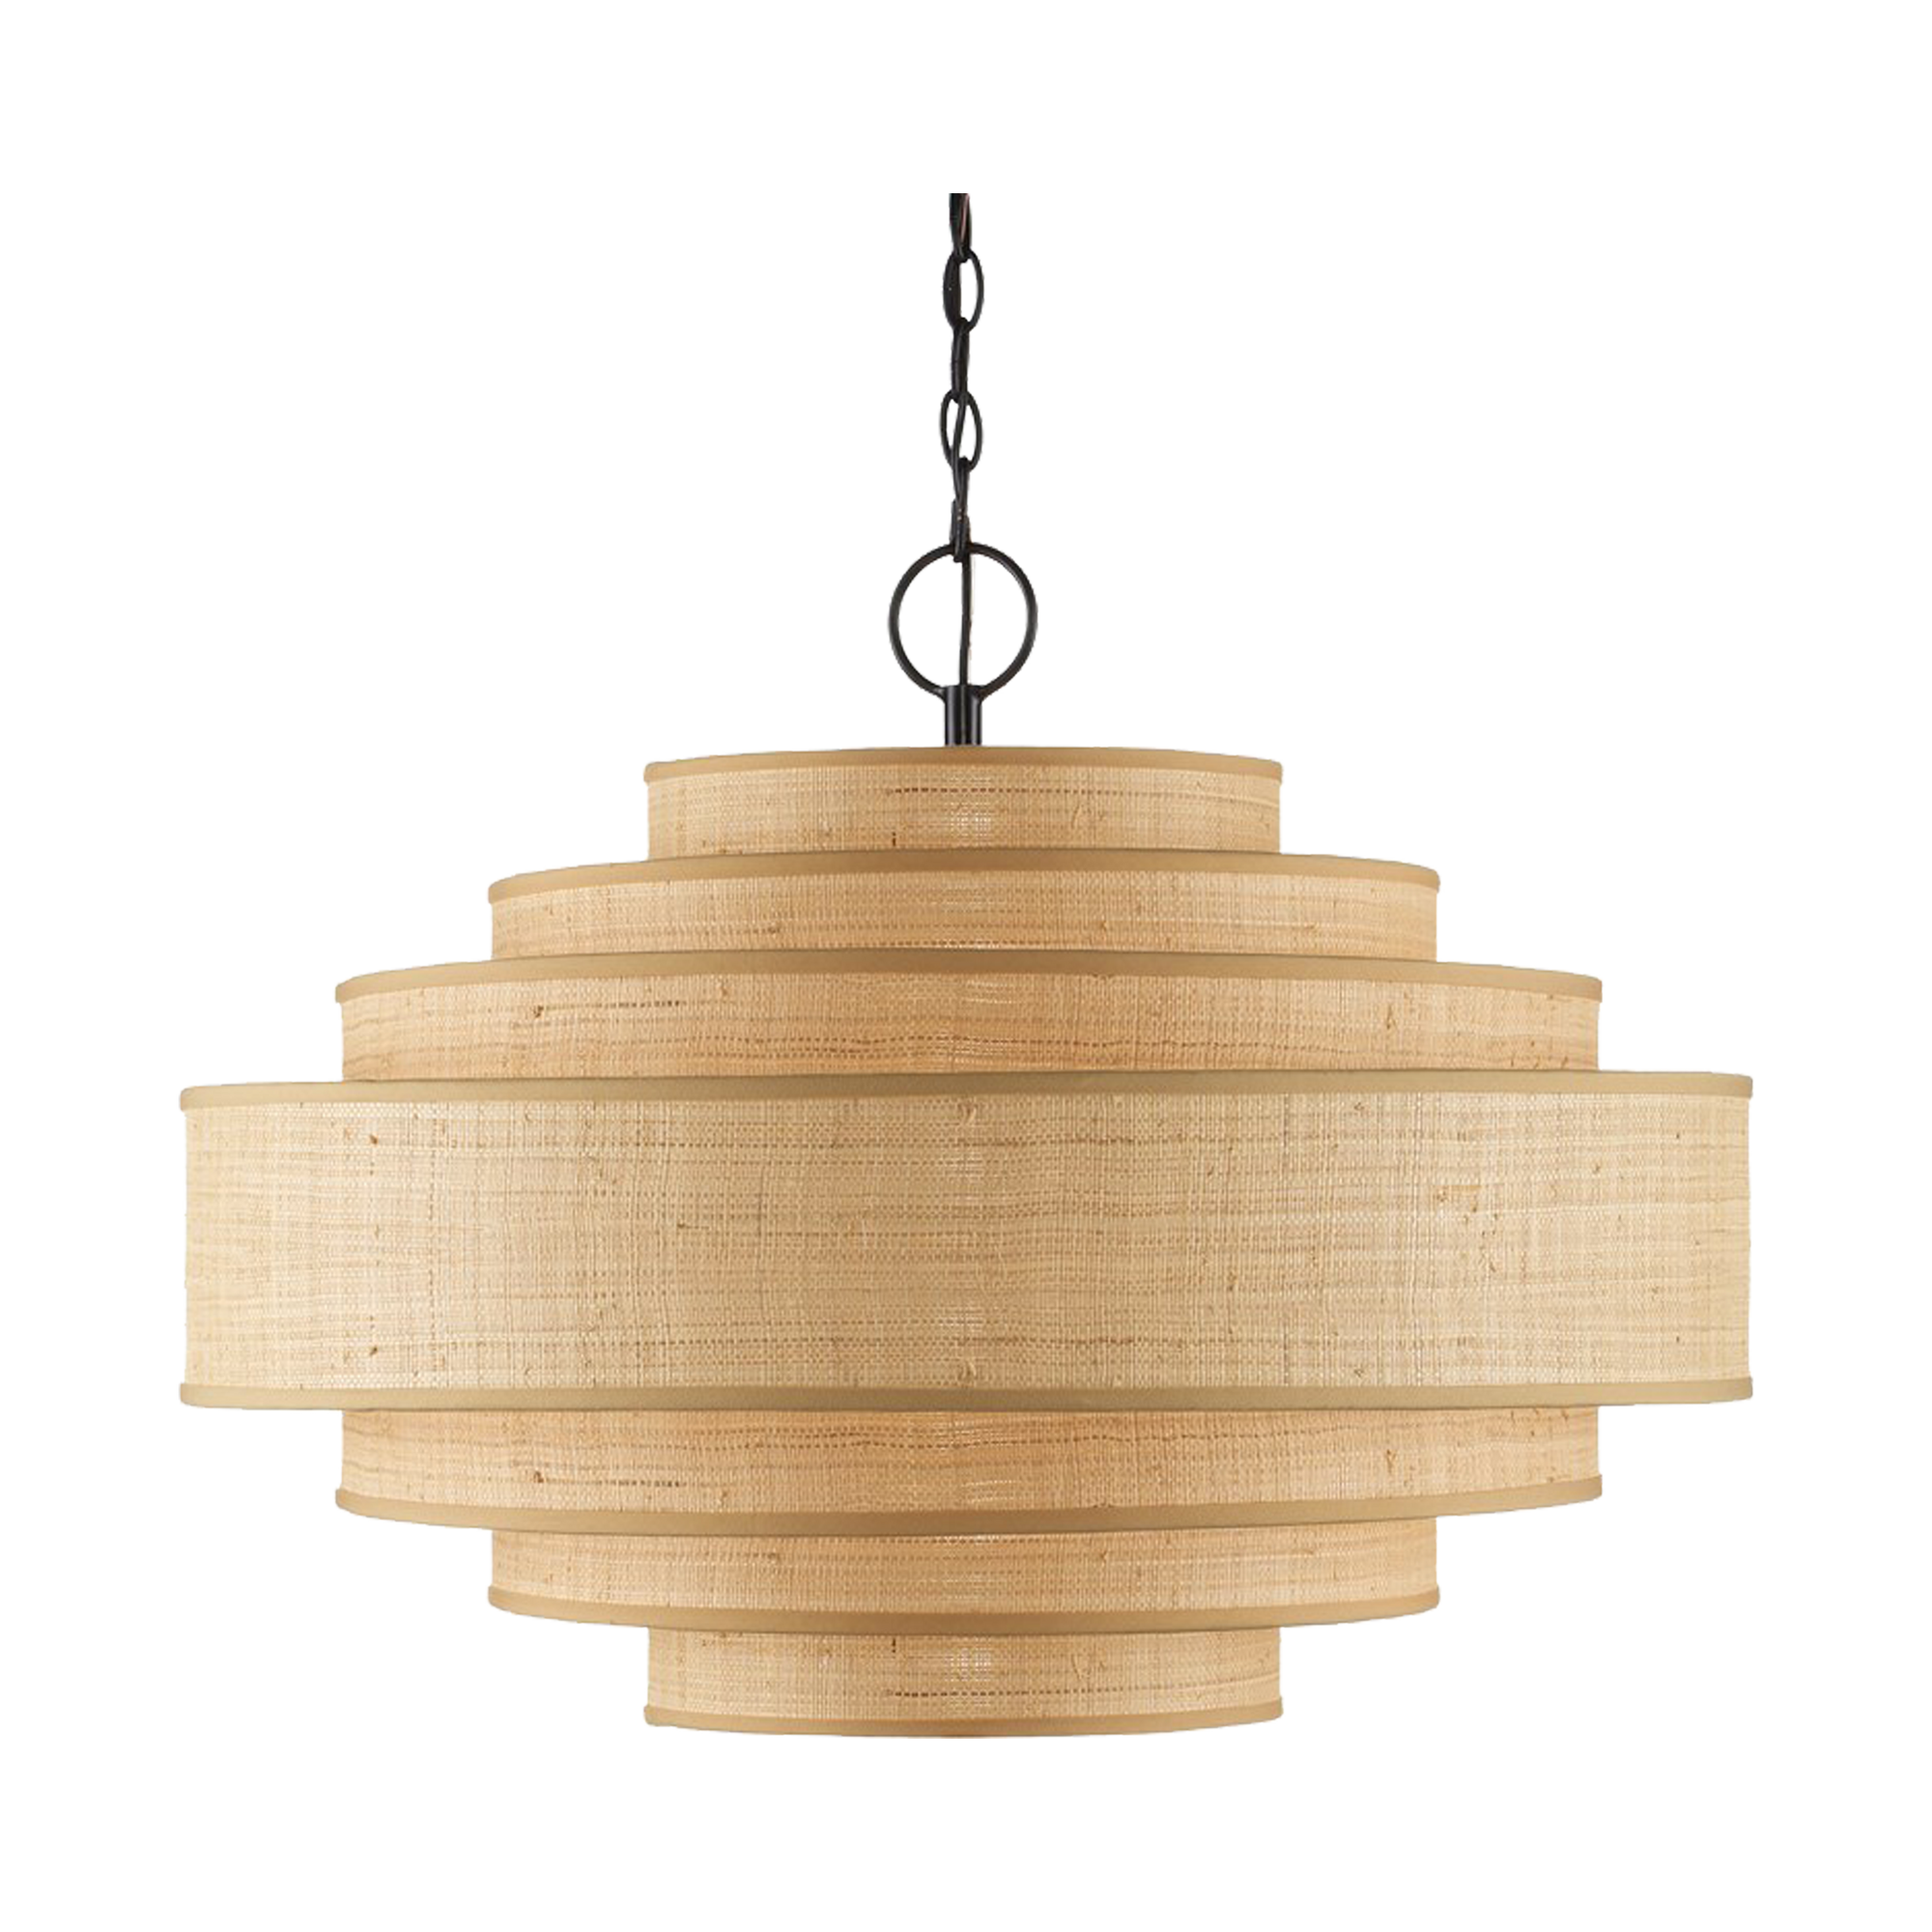 Grass cloth cylinders that make up the Maura Natural Pendant bring an elevated design statement to the fabric shades on this tan pendant.